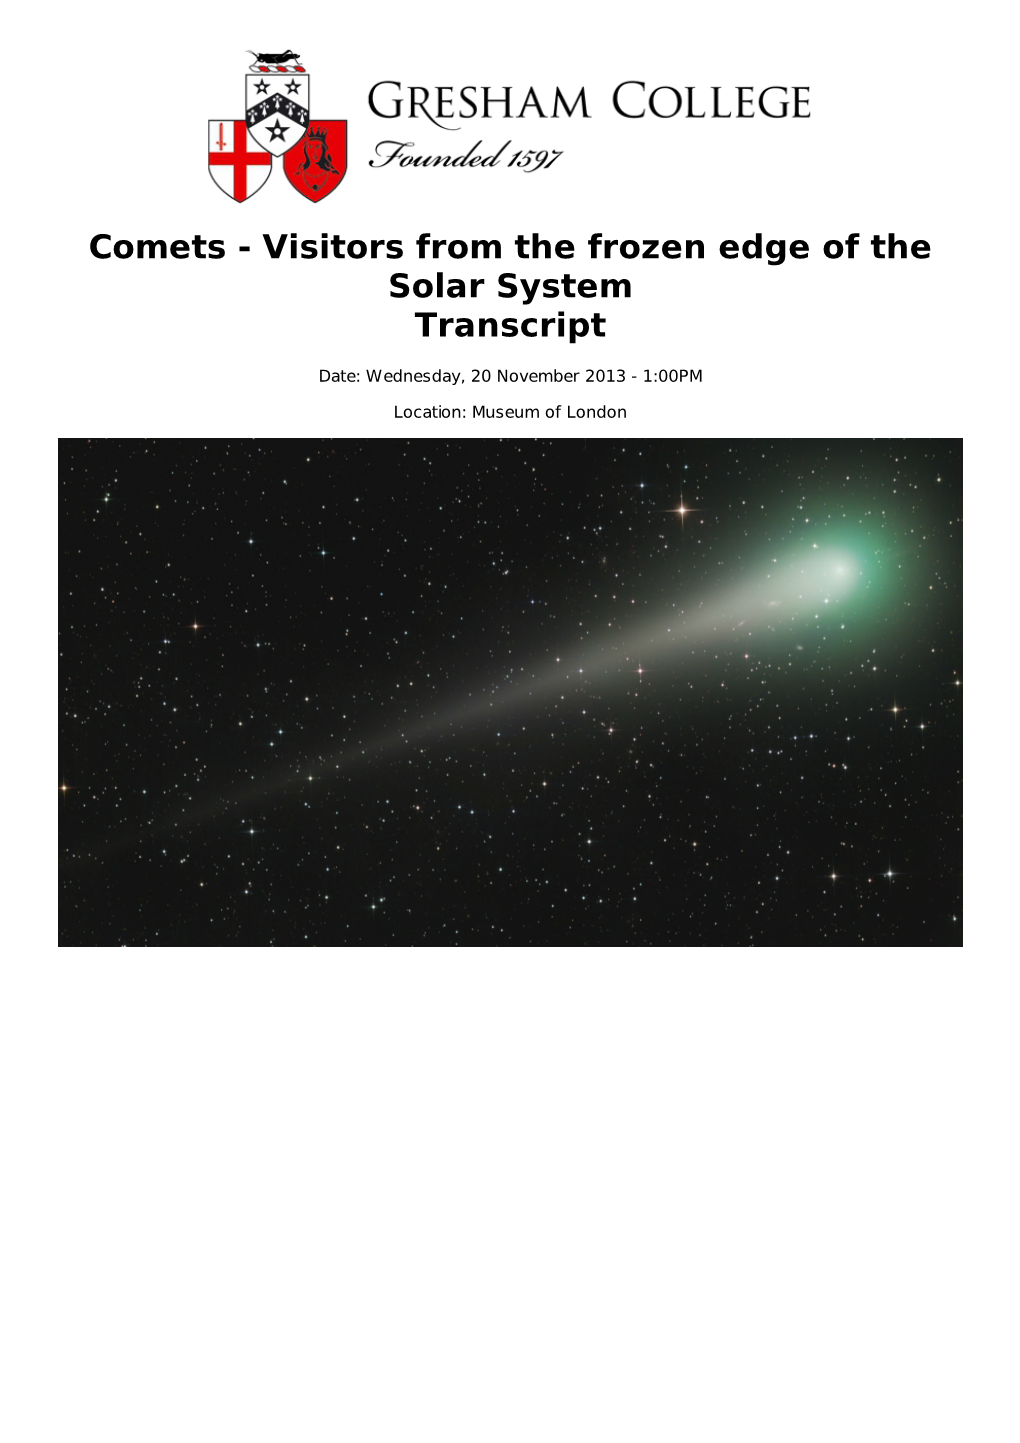 Comets - Visitors from the Frozen Edge of the Solar System Transcript